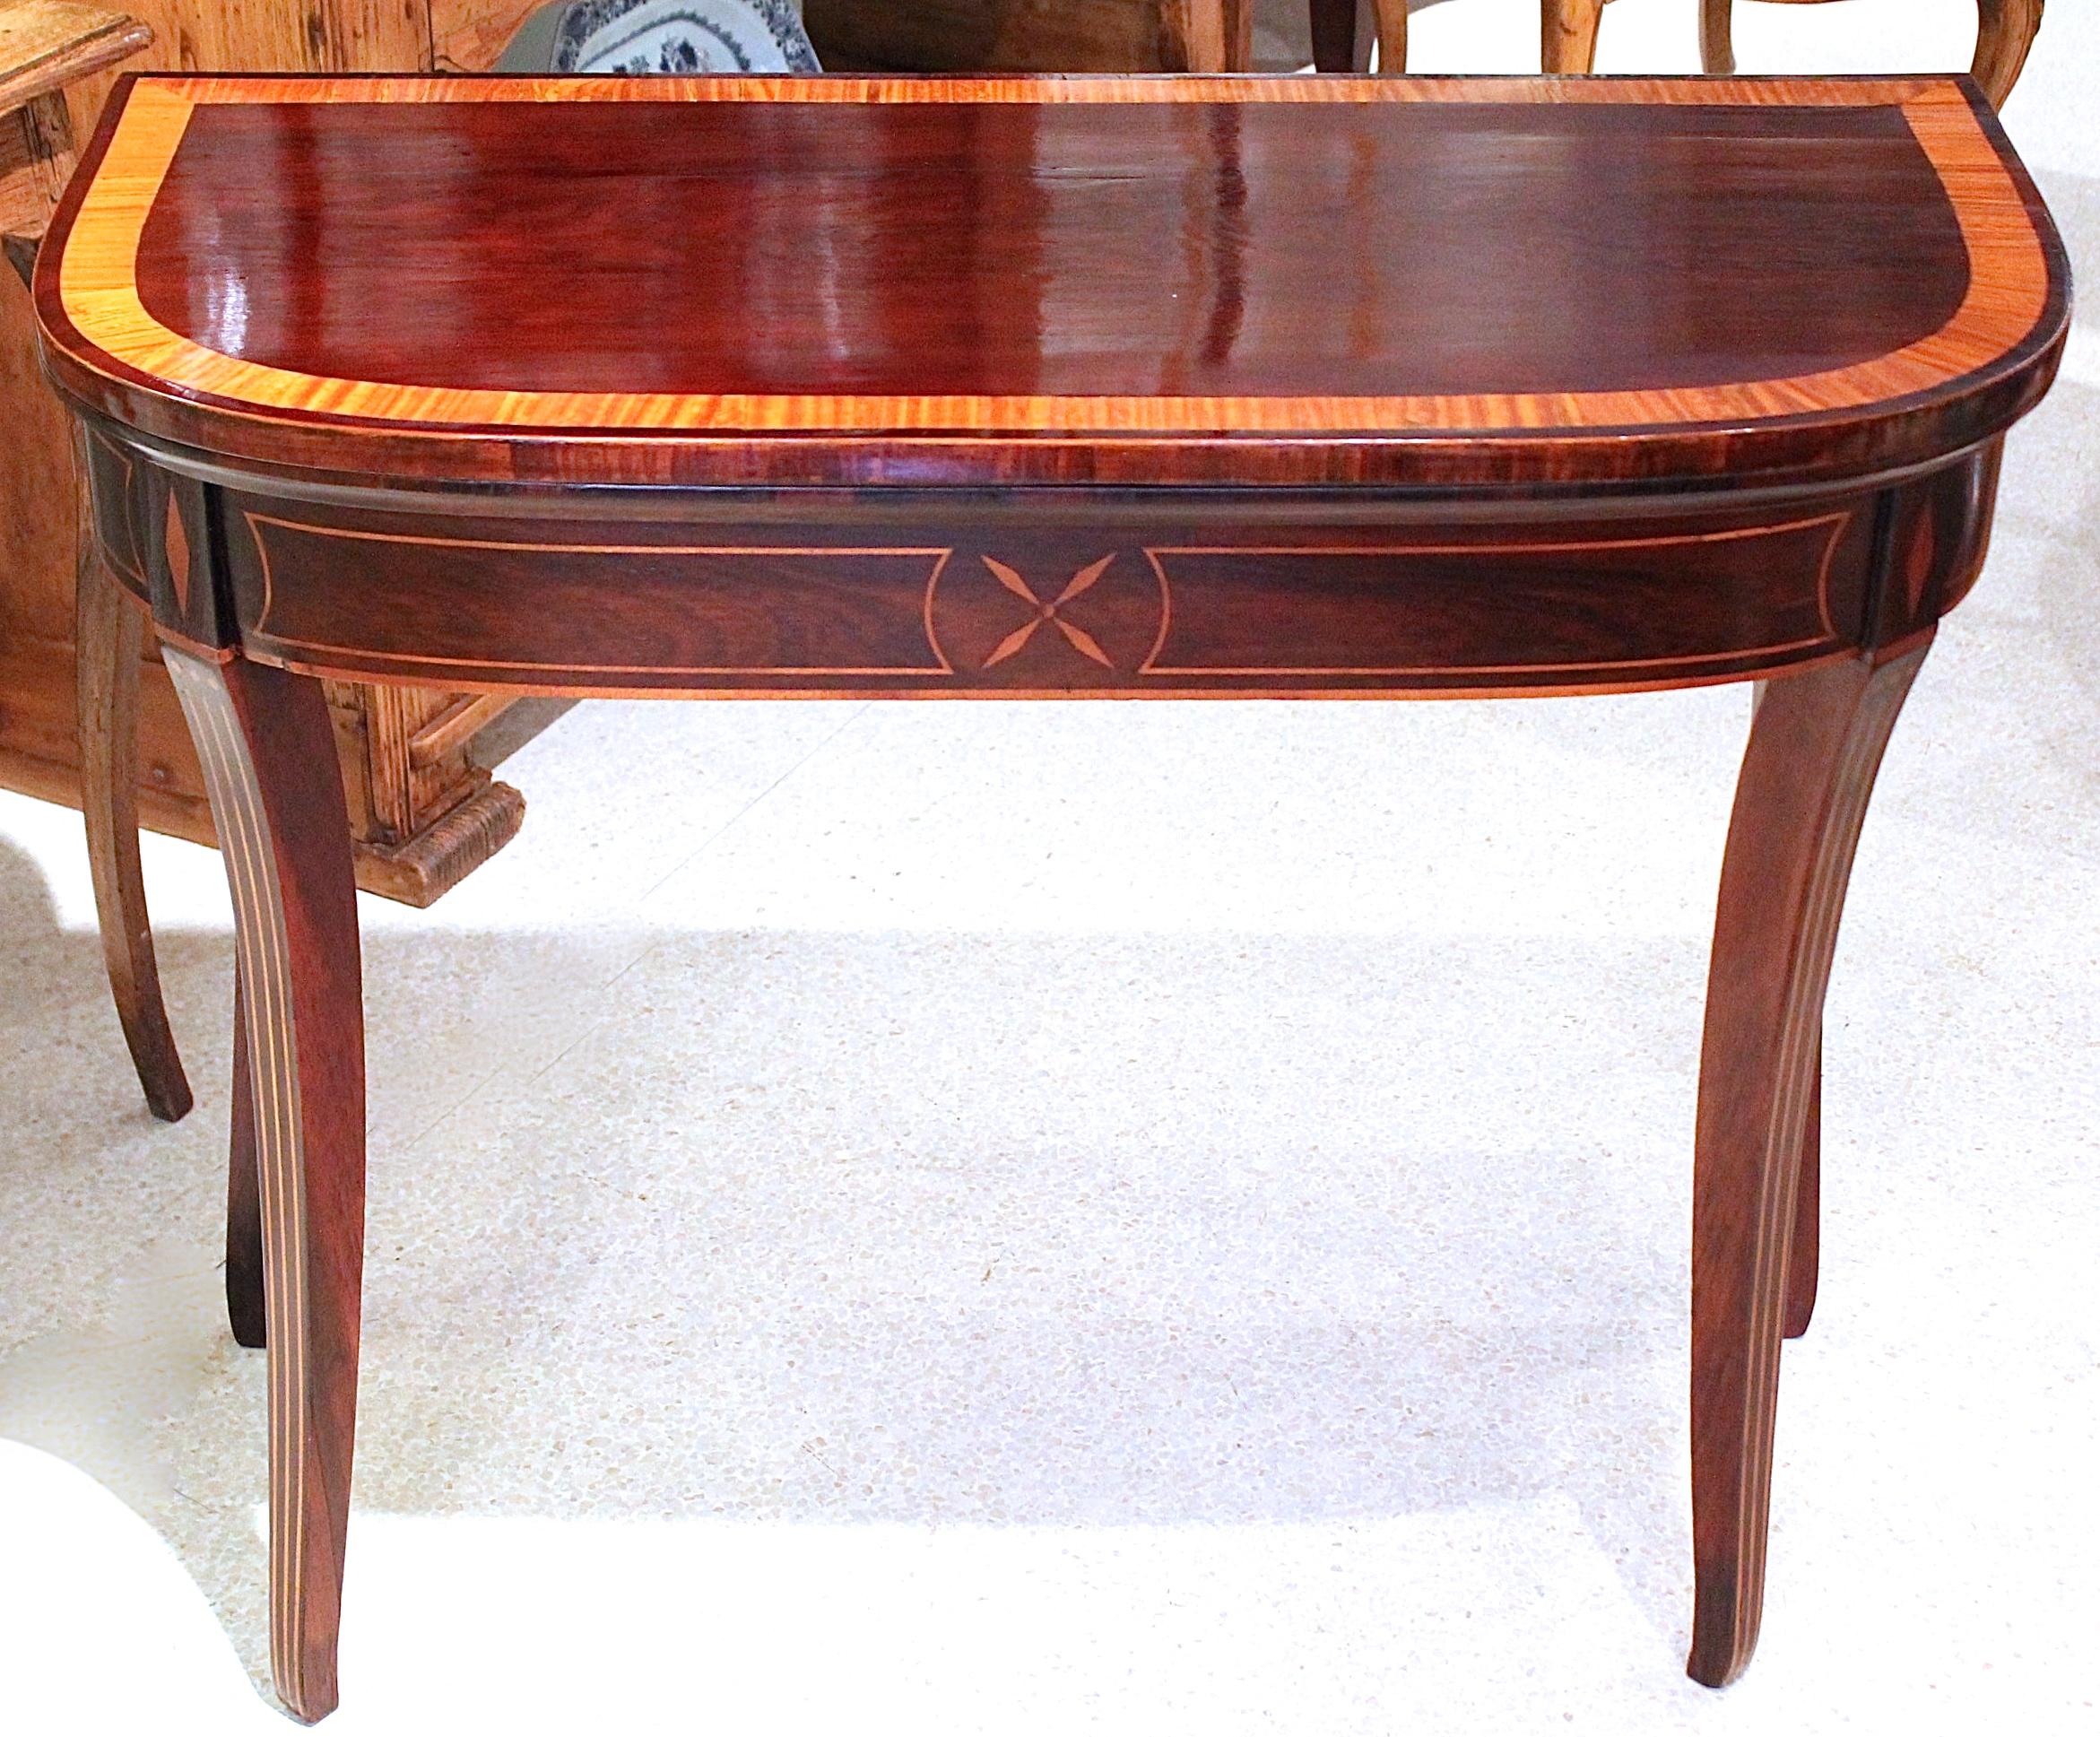 A stylish and unusual sabre leg D- shaped card table, boldly inlaid with contrasting satinwood. Ideal for a small console/side table. The top is both banded and strung with luminous satinwood, while the apron and all four legs have striking inlaid